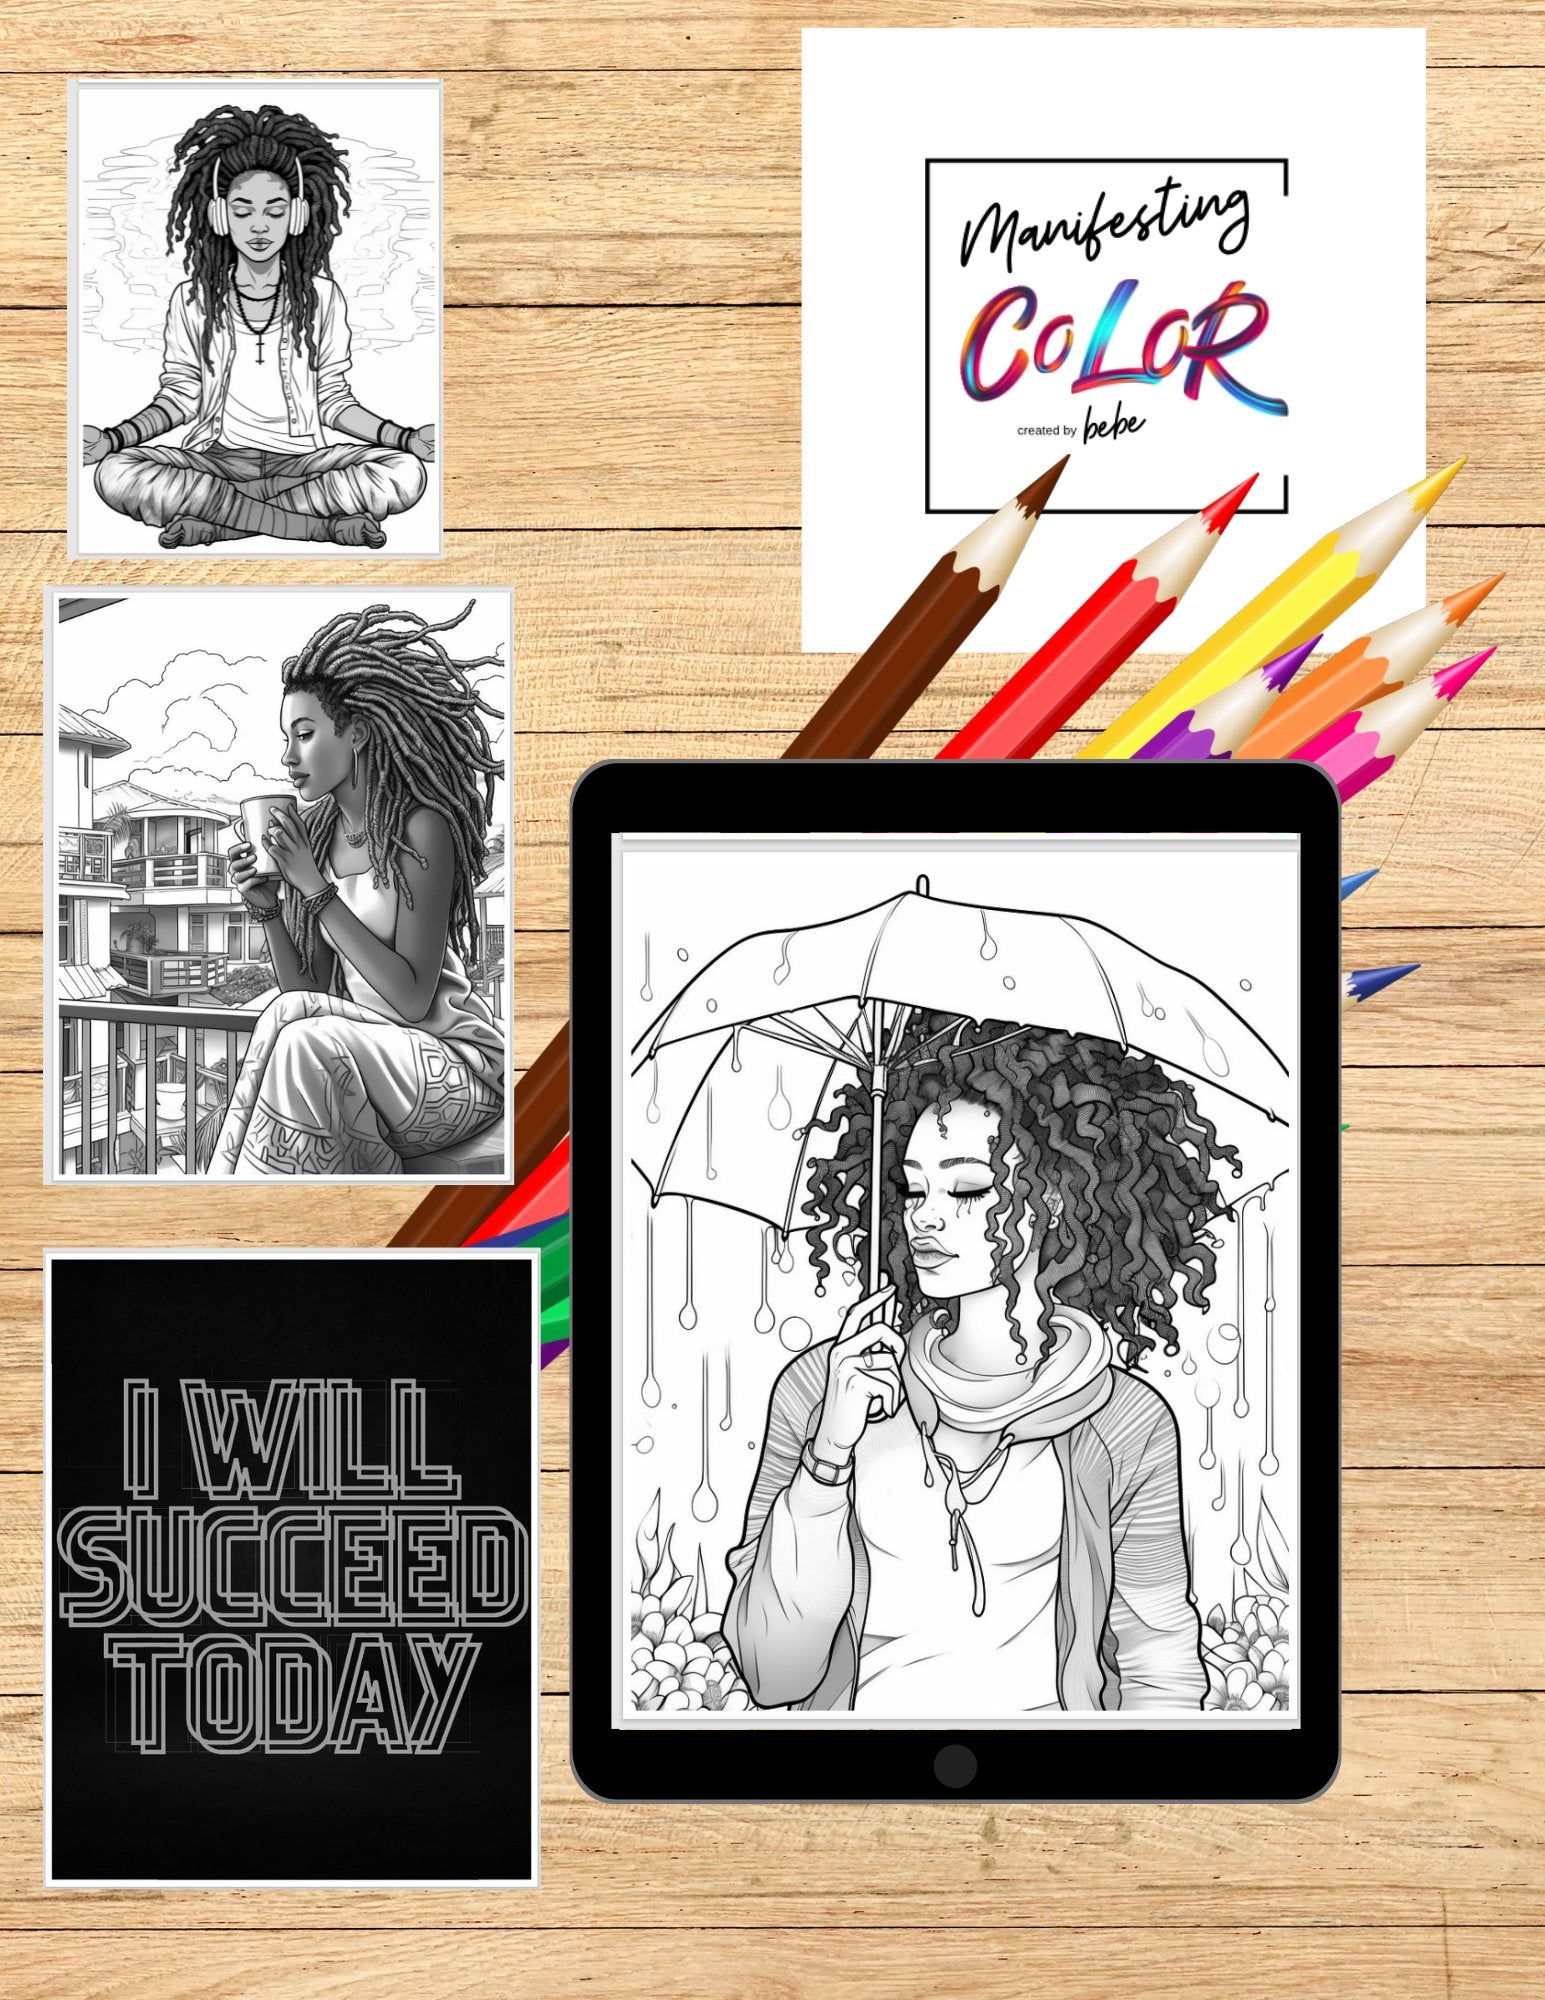 Digital Manifesting Color Adult Coloring Book with Self Love Affirmations (PDF or PRINTABLE) - manifesting with anxiety